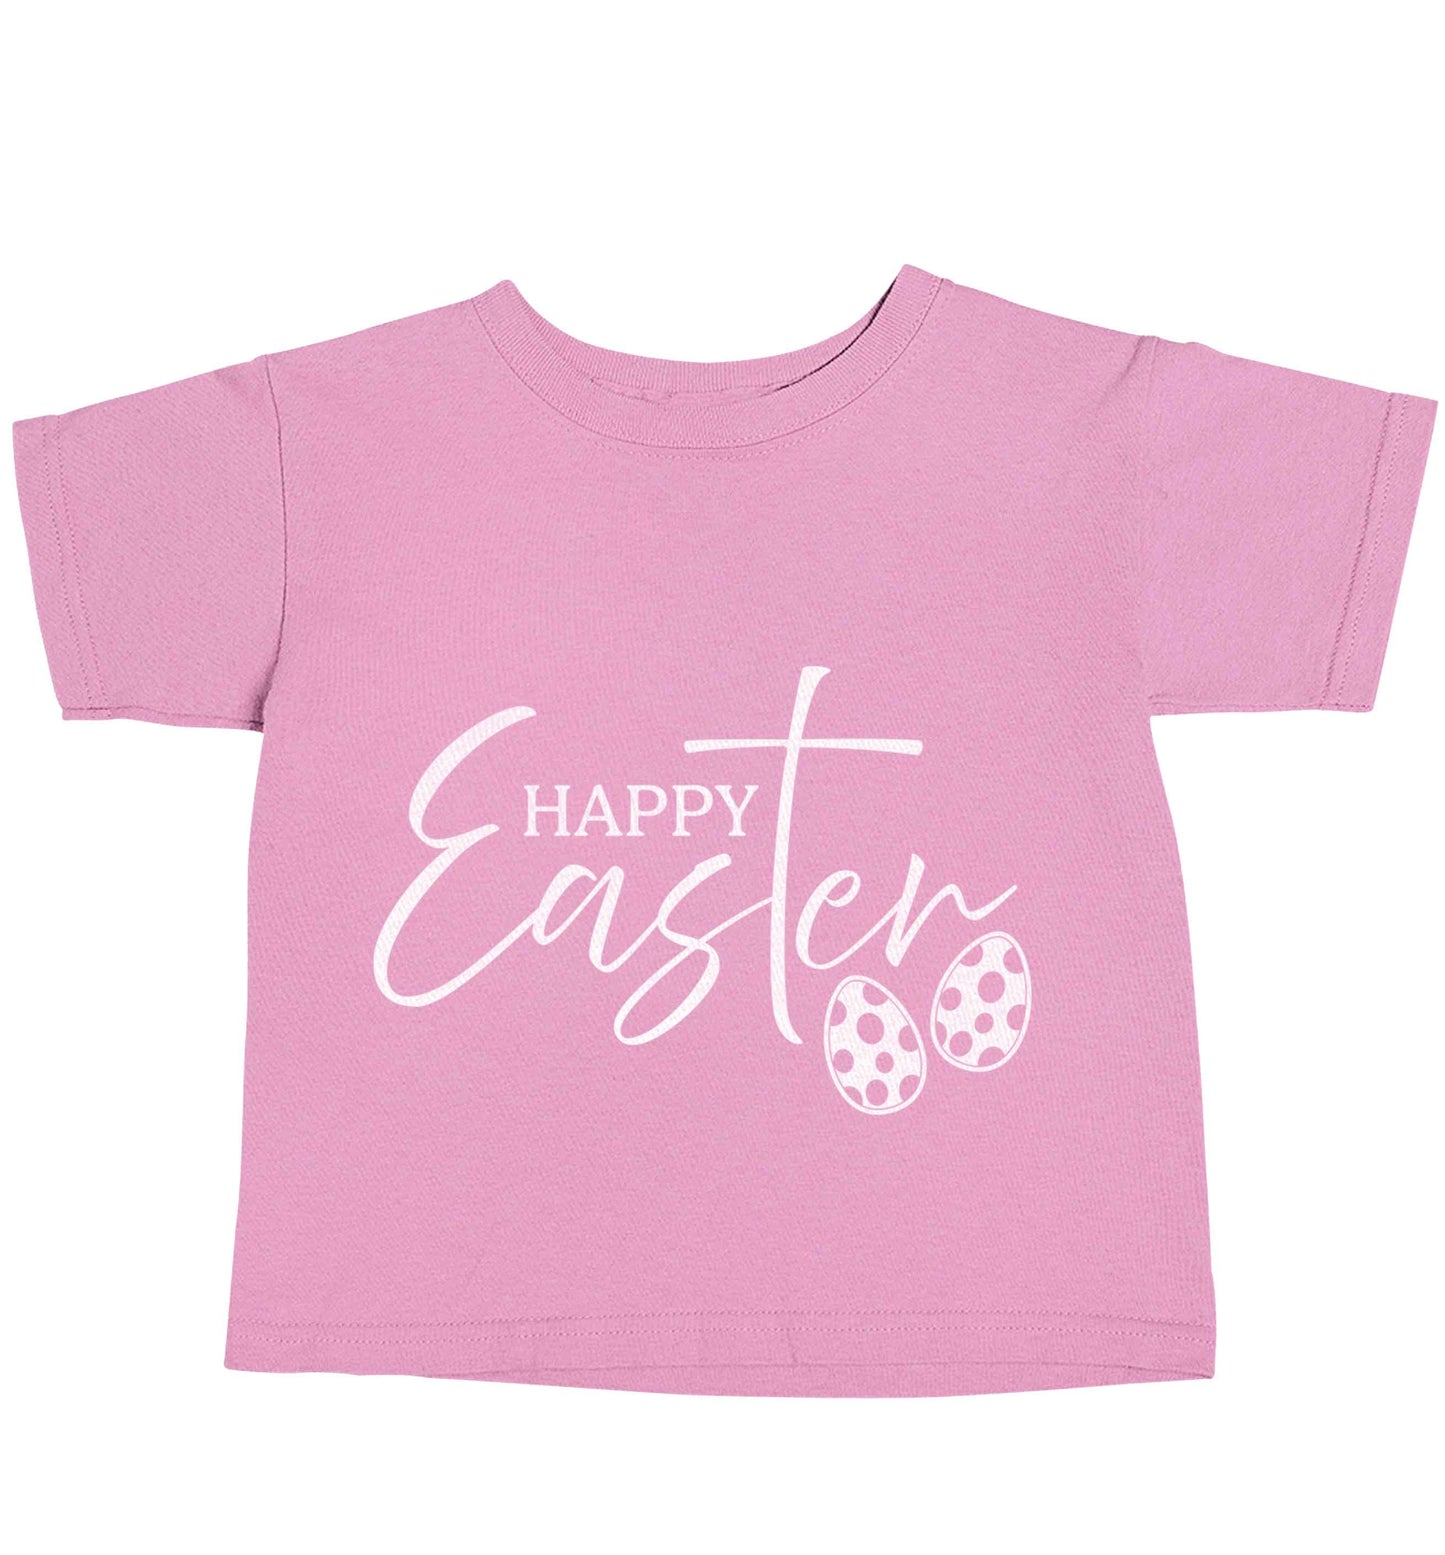 Happy Easter light pink baby toddler Tshirt 2 Years